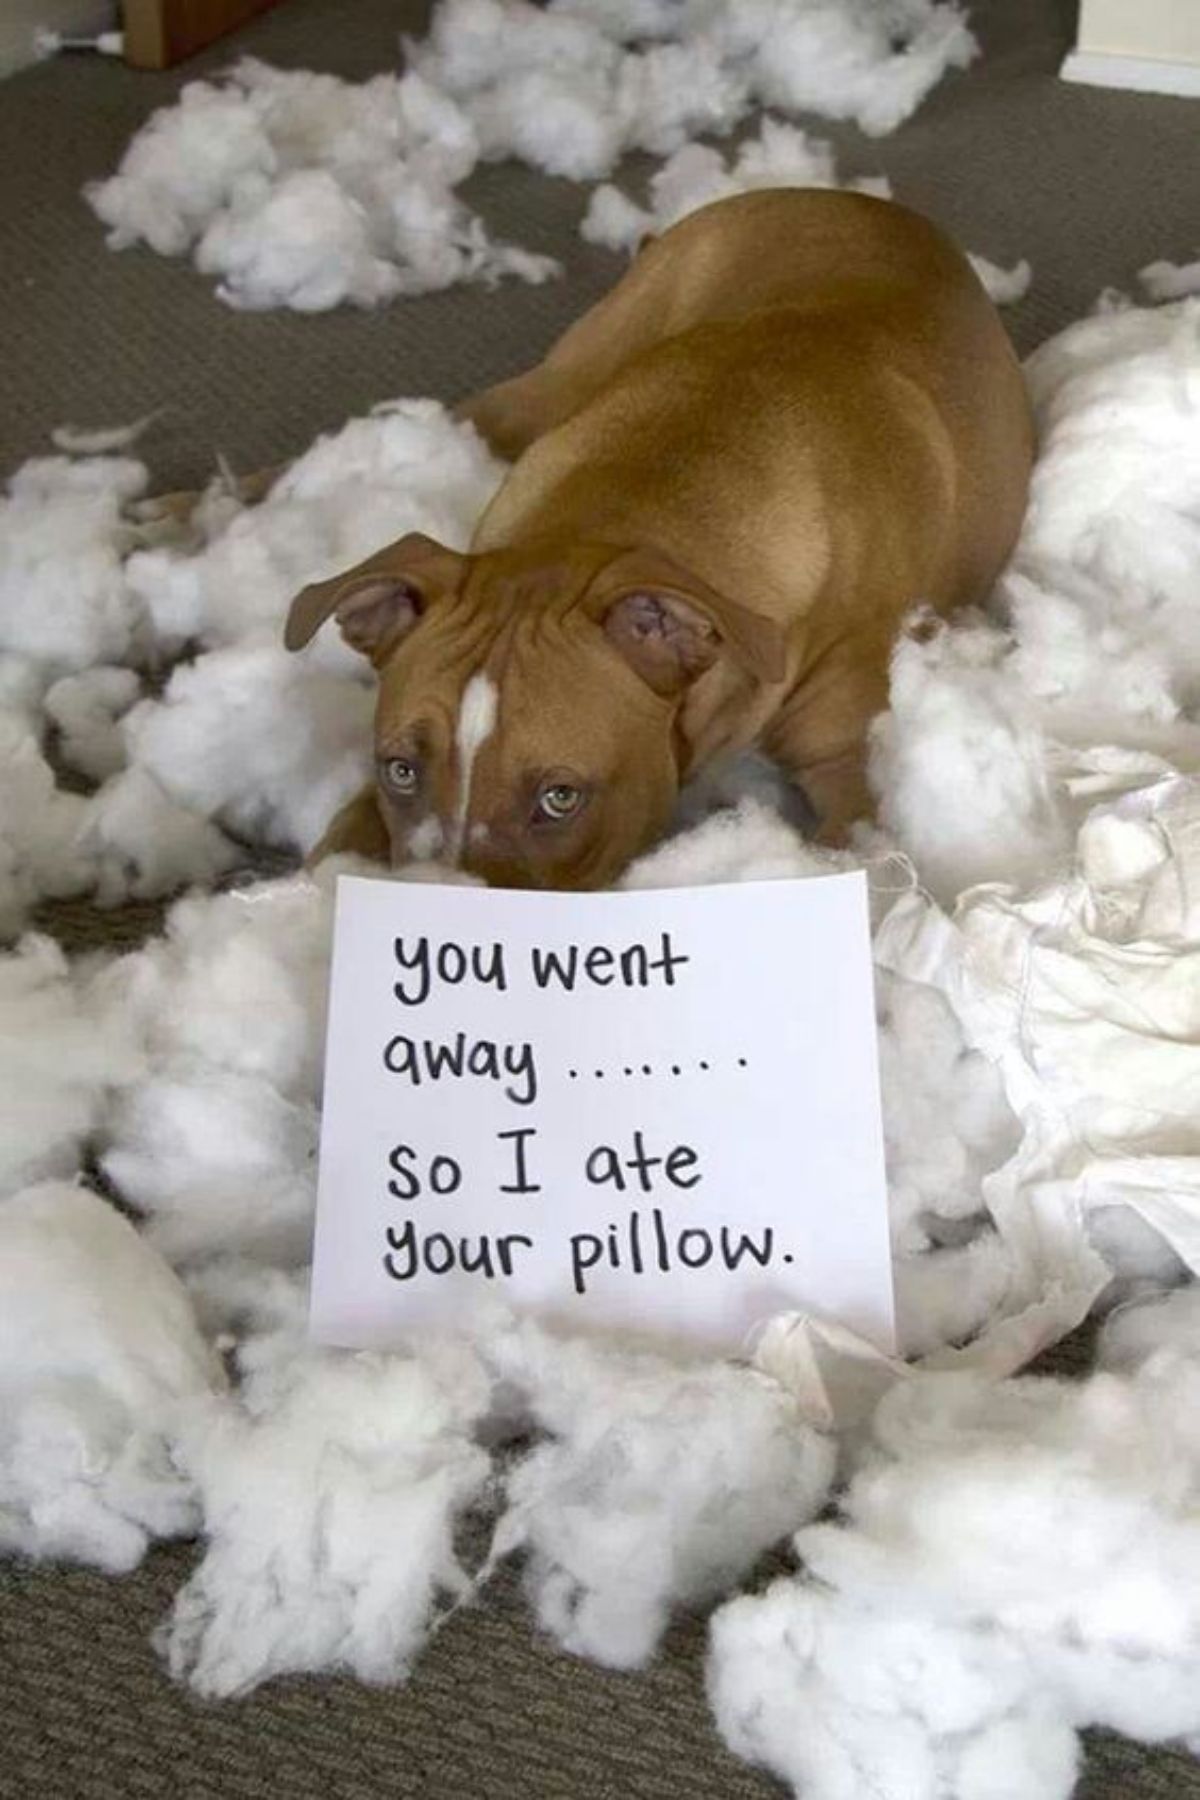 brown and white pitbull surrounded by stuffing with a sign saying it ate the pillow because the human left it behind